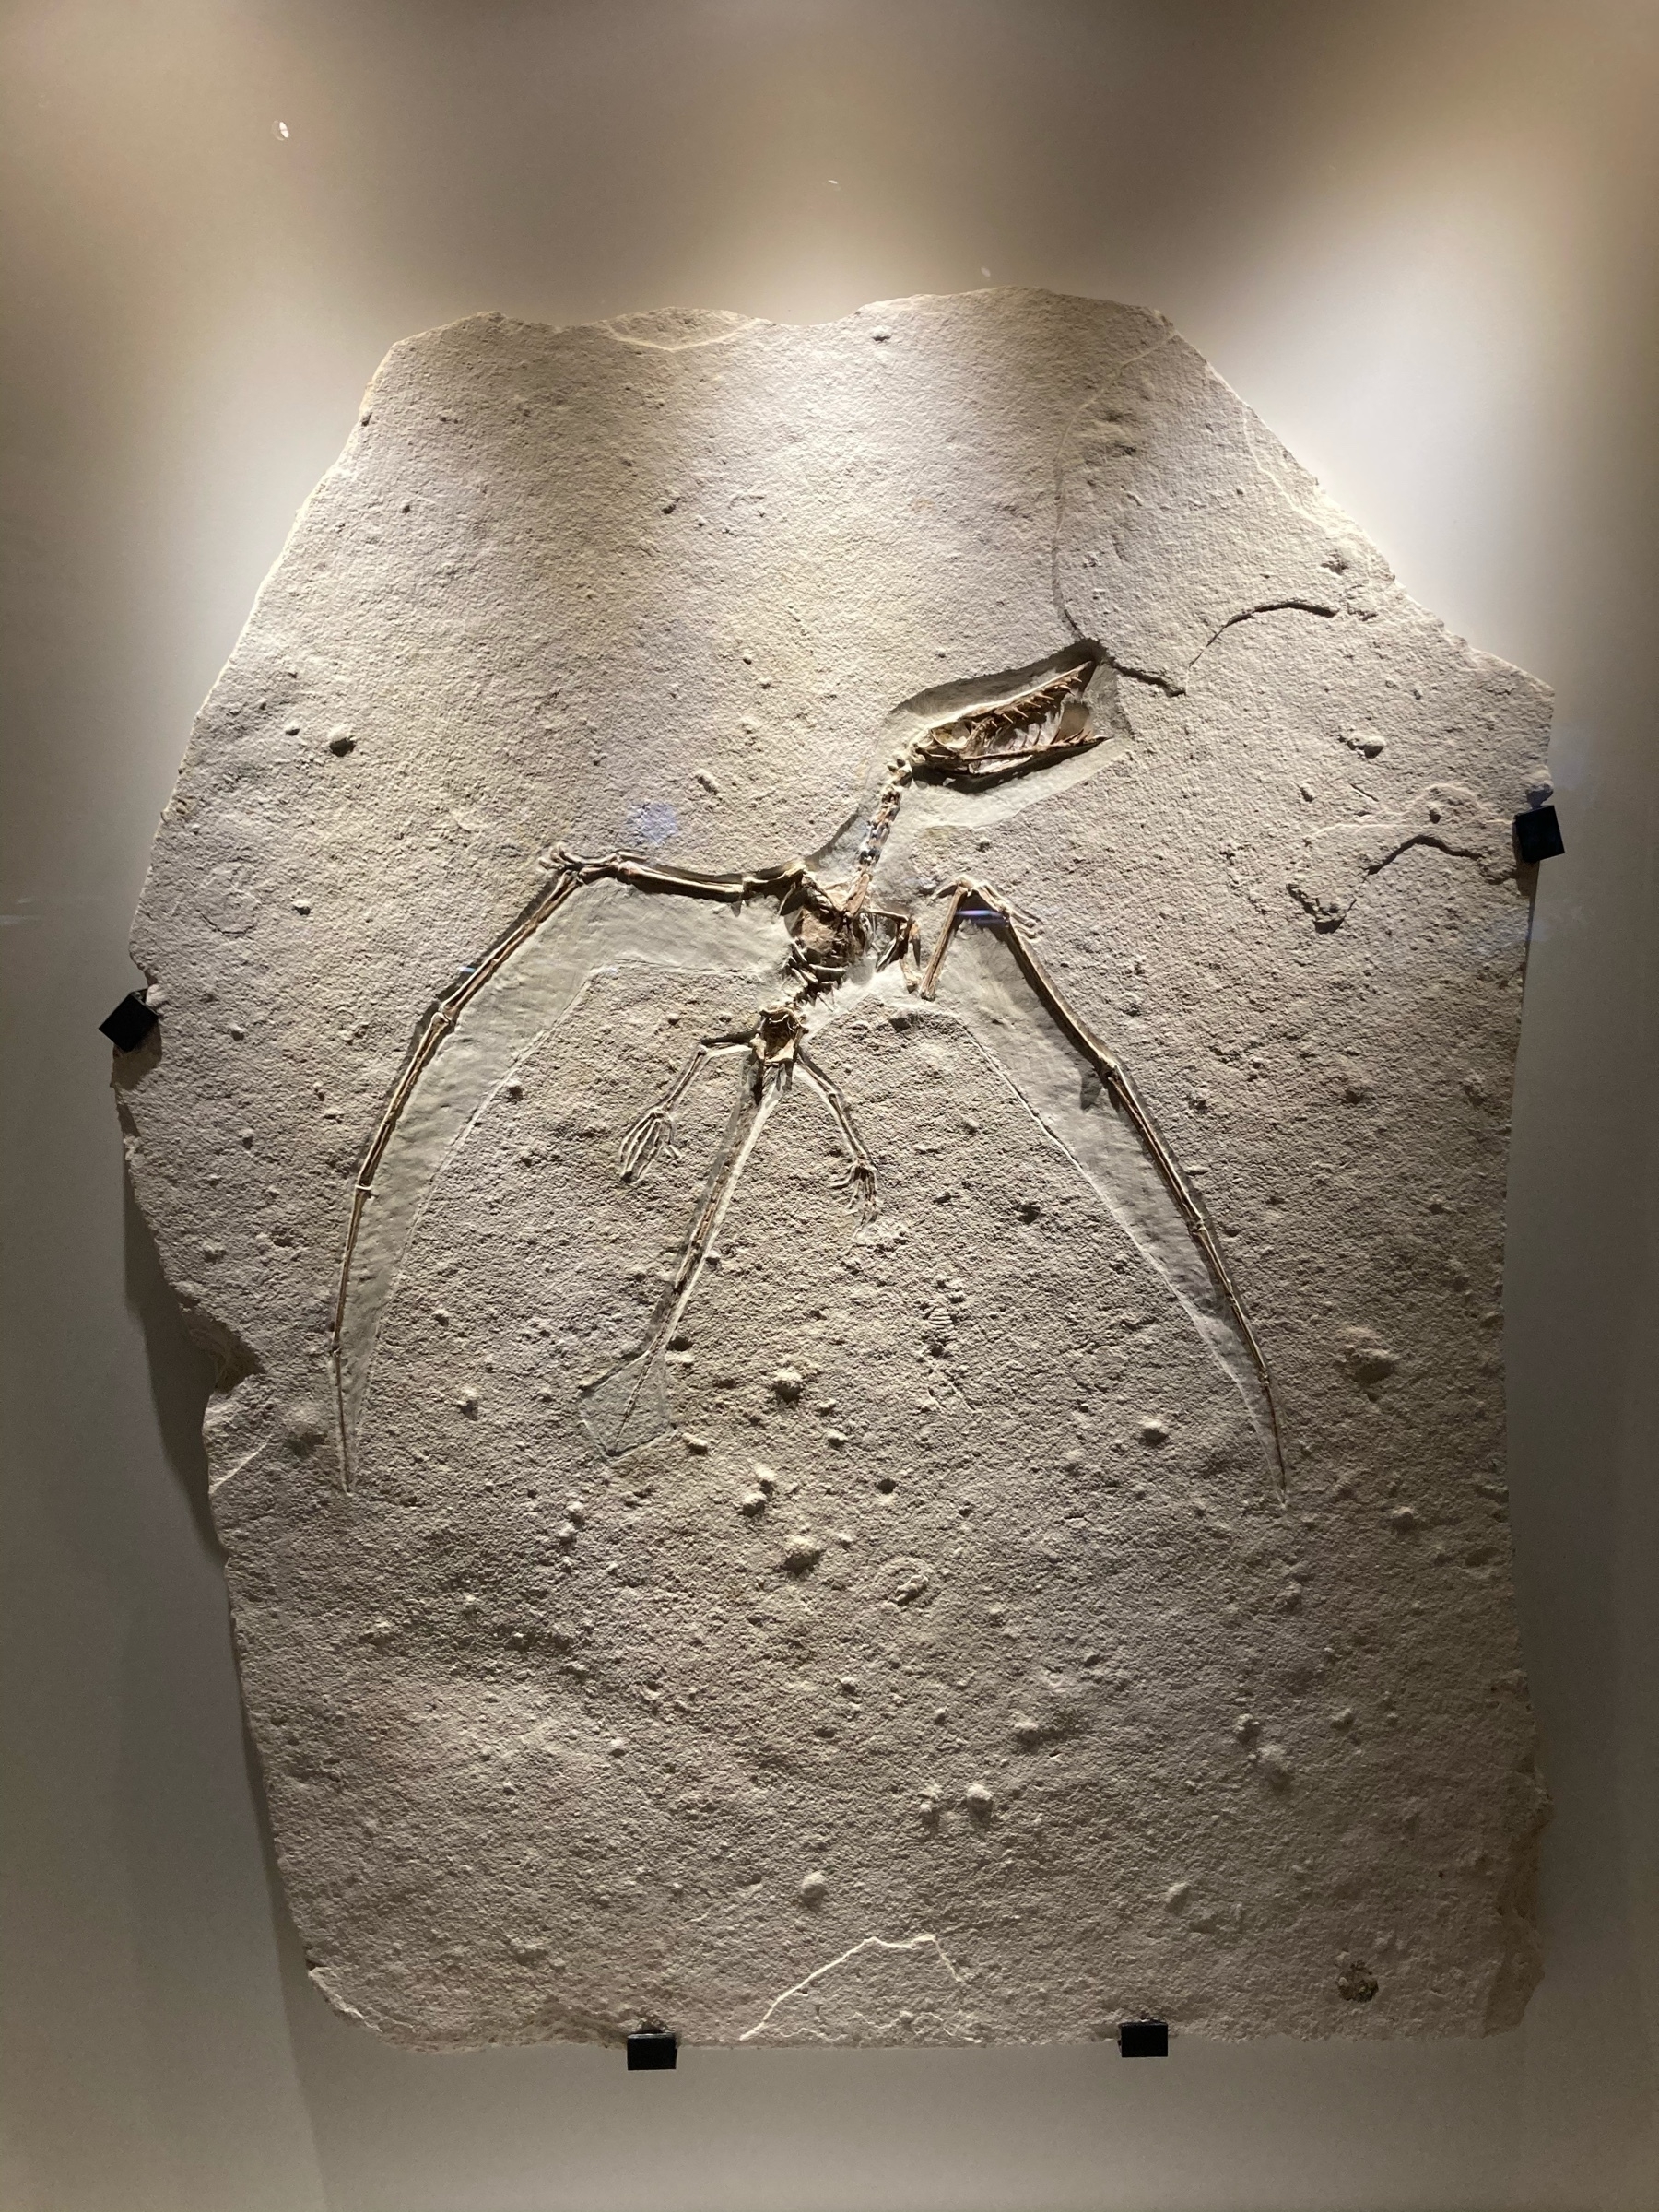 Image of an impression fossil of a pteradactyl